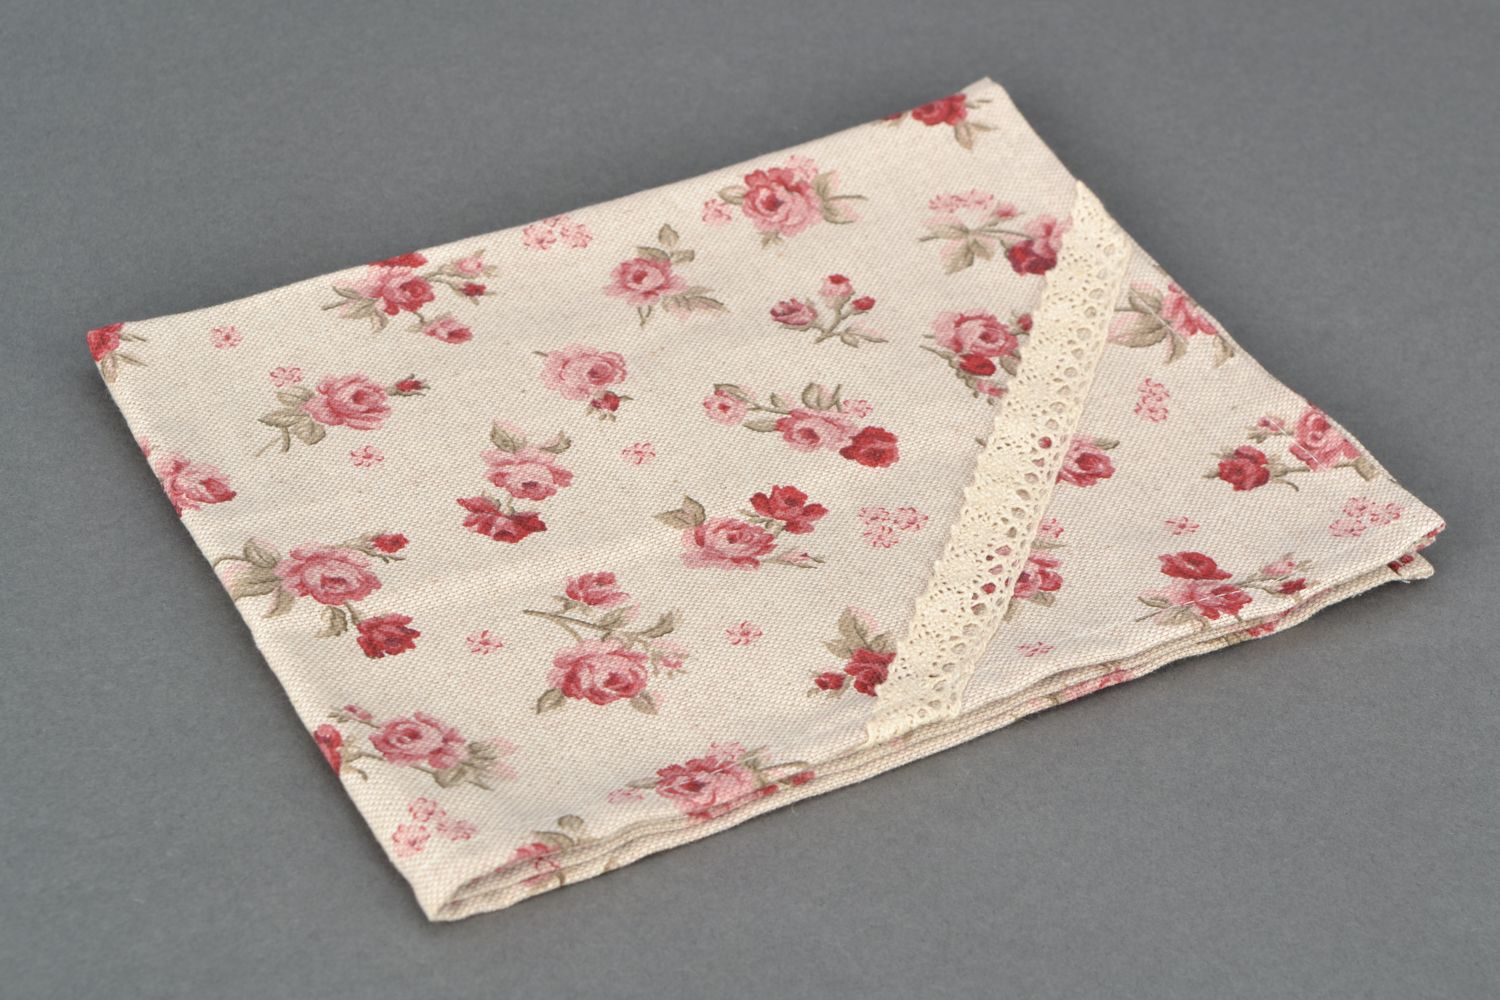 Decorative napkin made of cotton and polyamide fabric with floral print and lace photo 3